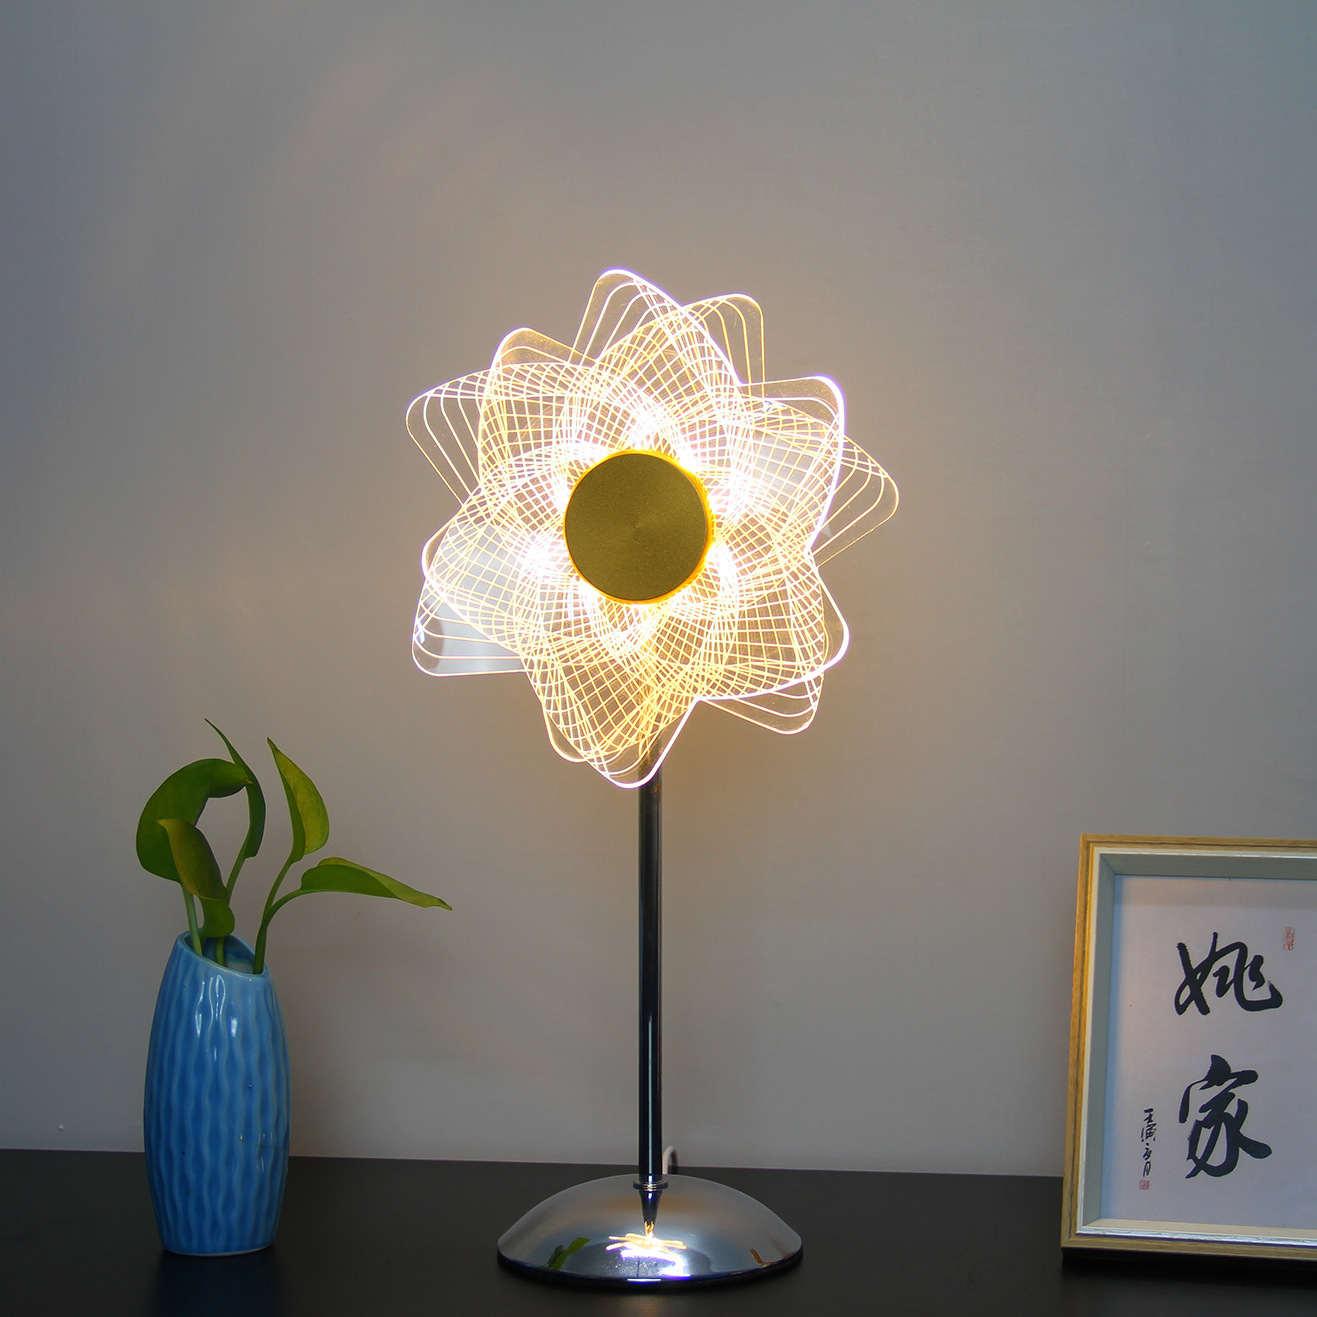 Acrylic Creative Gift Ambience Light Sunflower Decorative Table Lamp Bedroom Decoration Windmill Plug-in Bedside